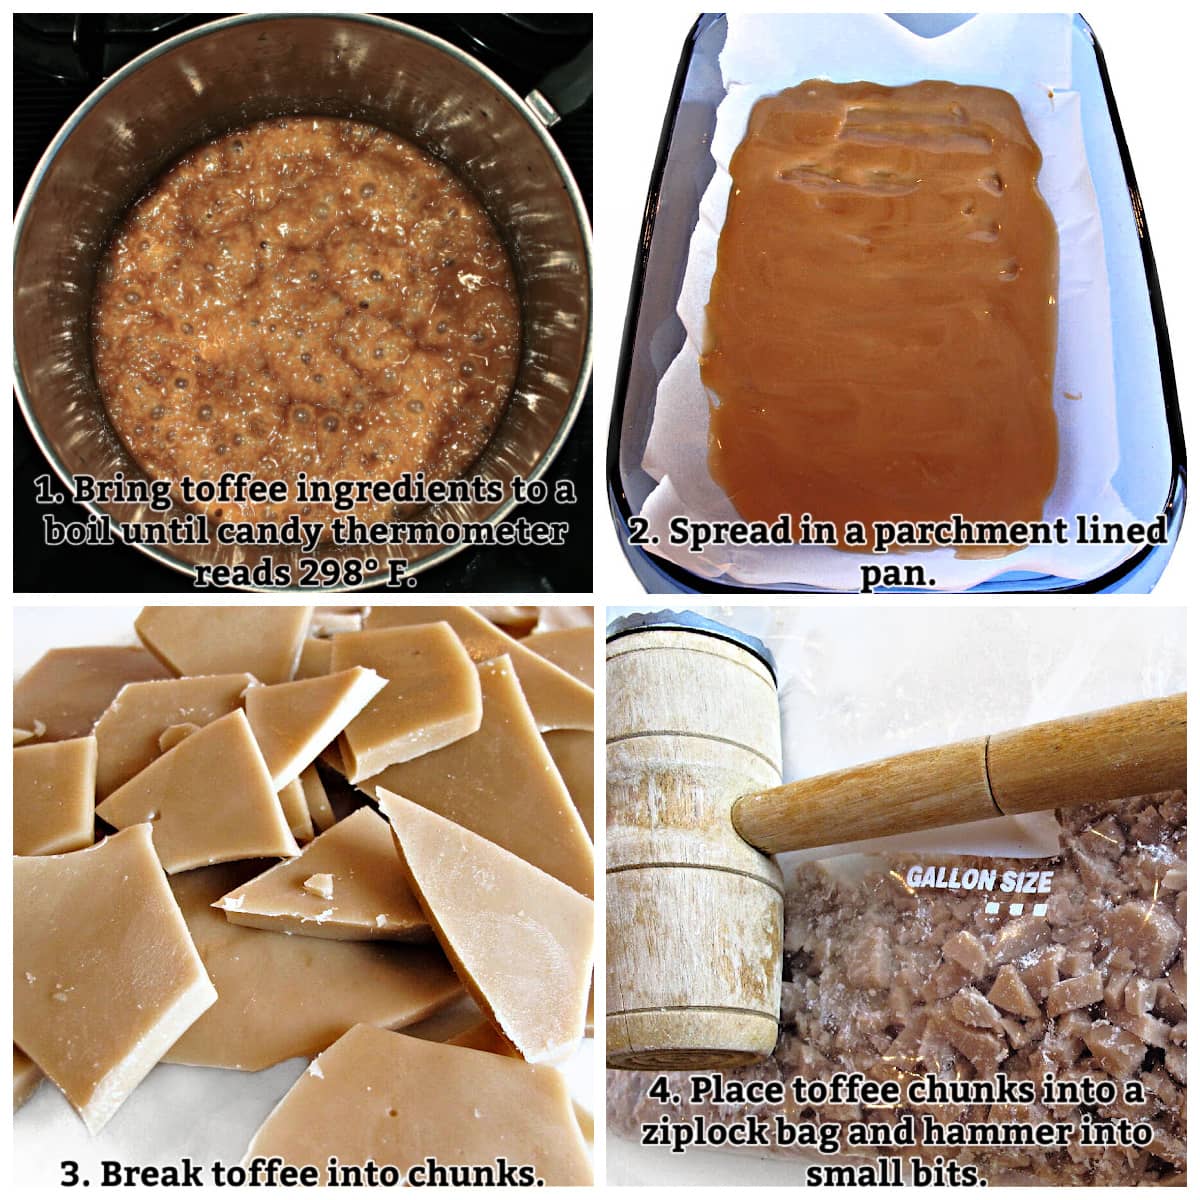 Toffee instructions: bring ingredients to a boil, spread in pan, break into chunks, hammer into bits.